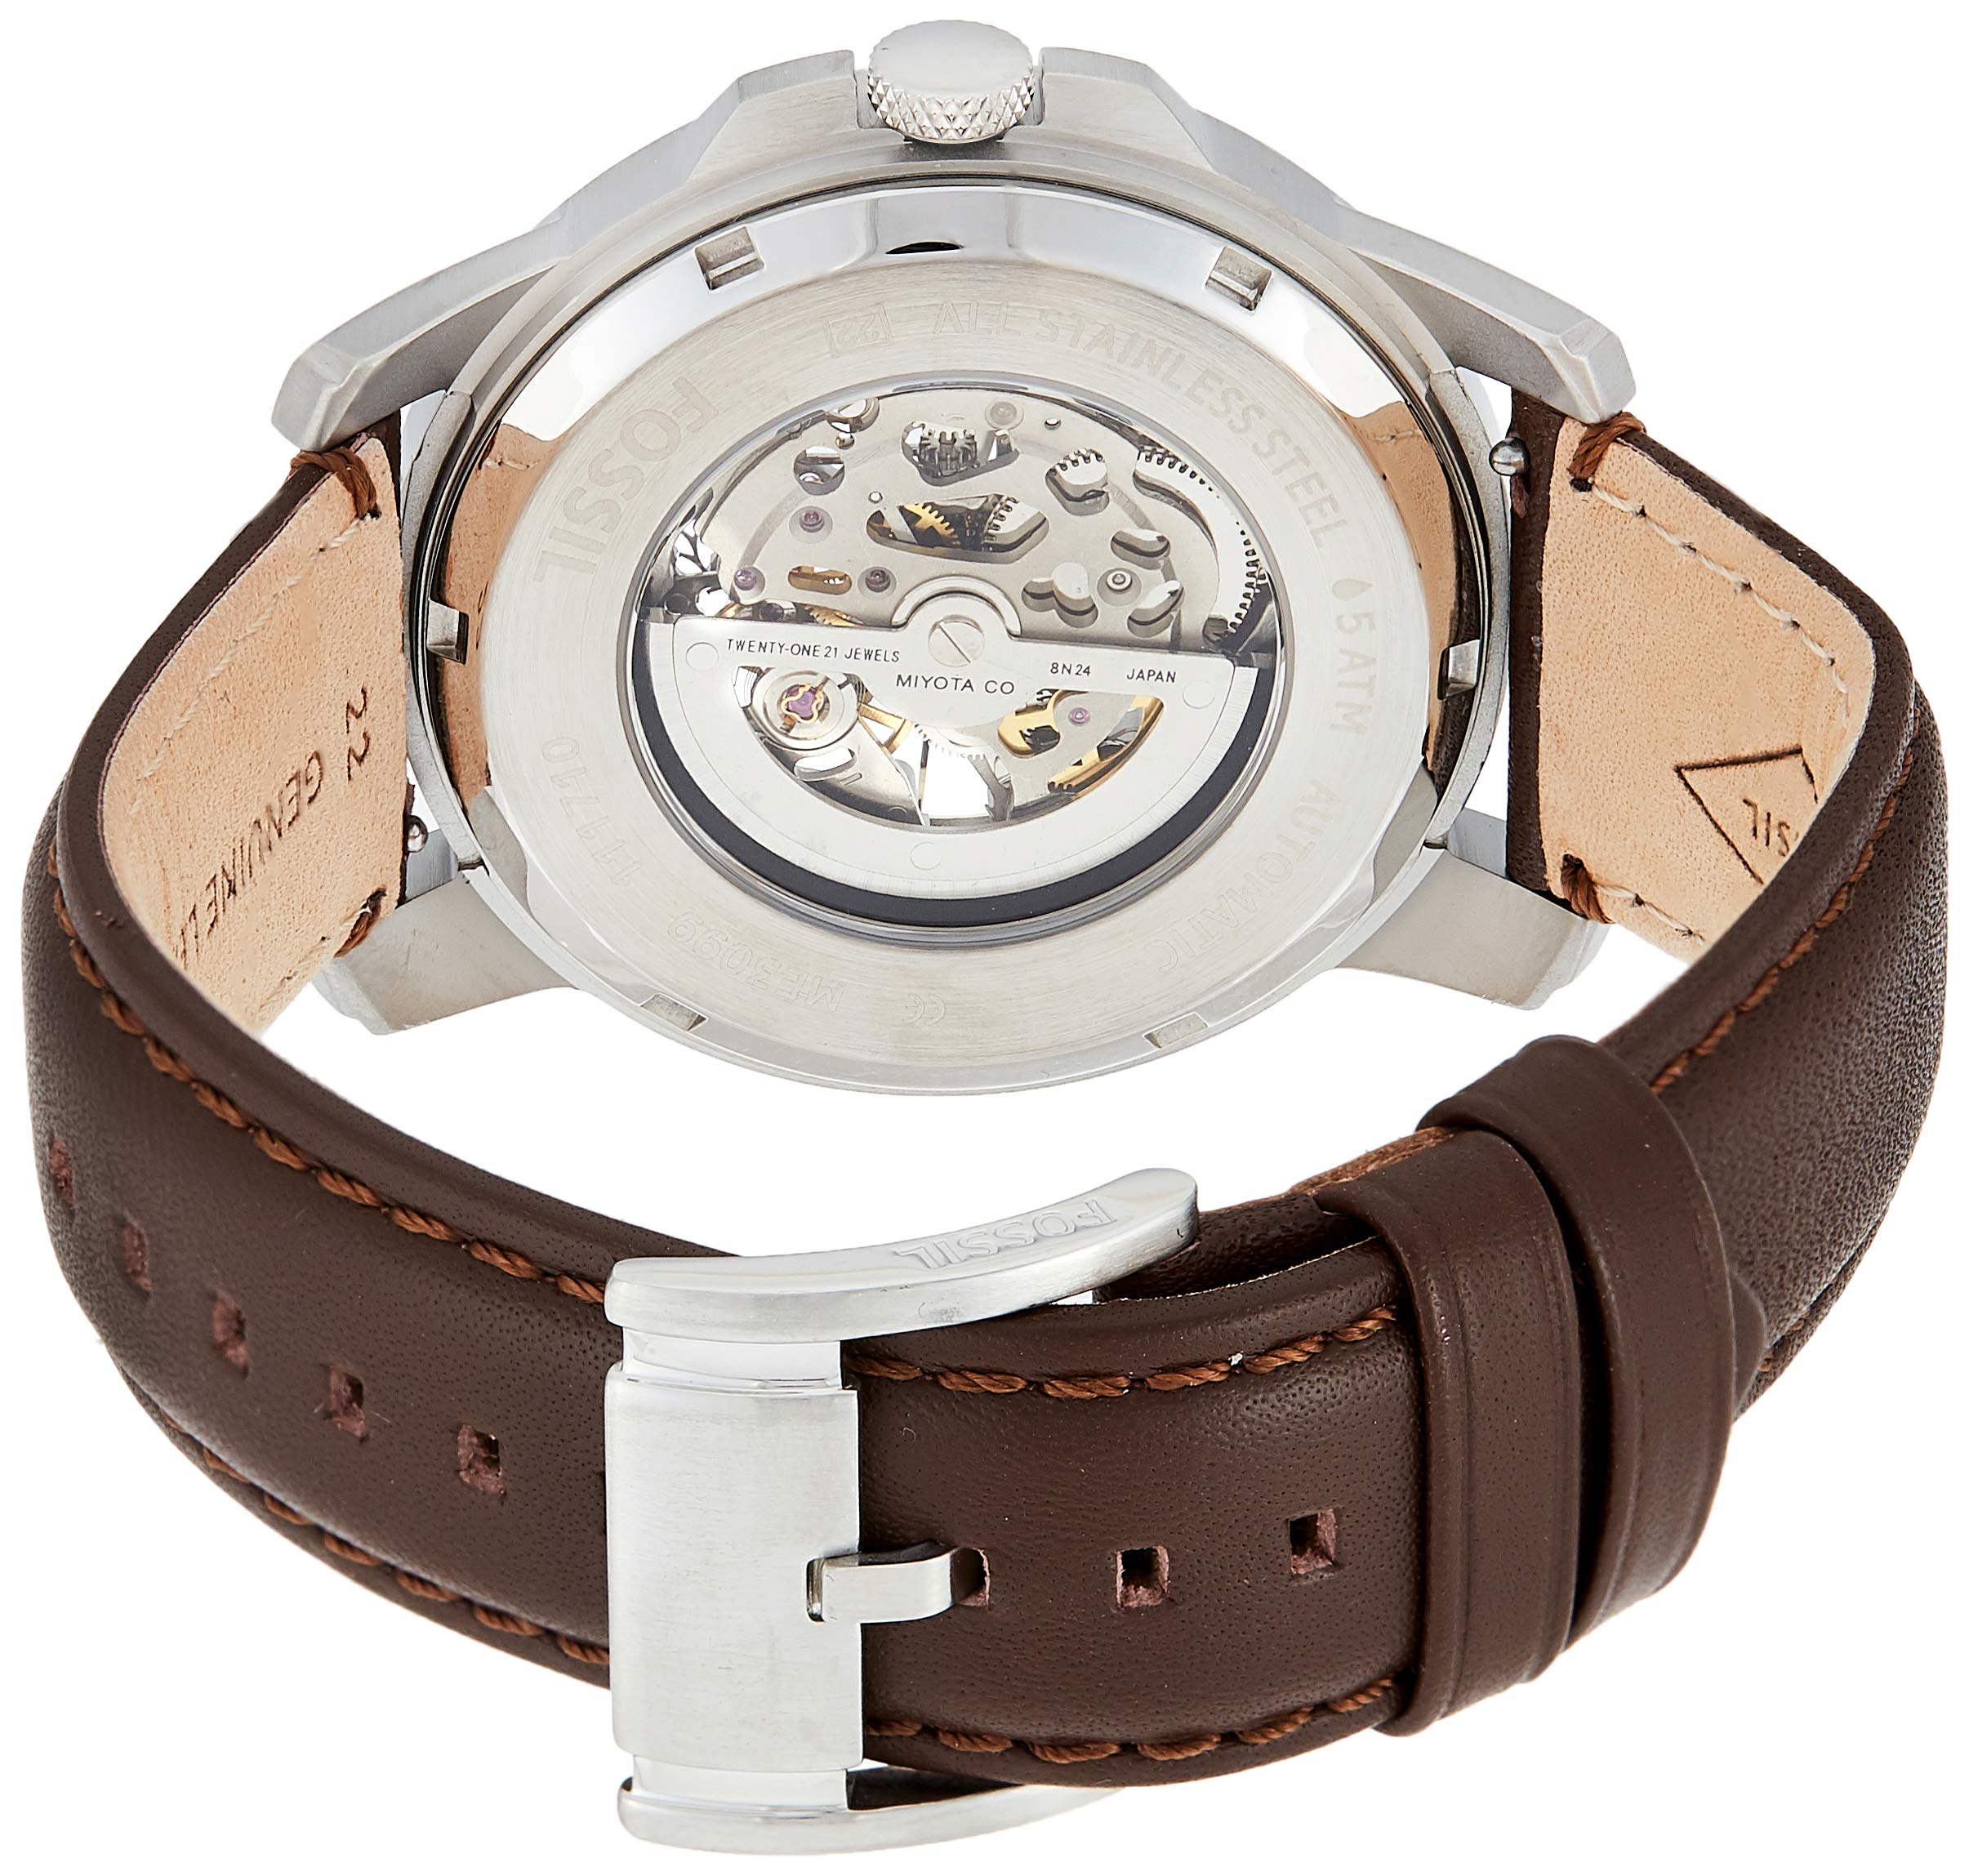 Fossil Men's ME3052 Grant Two-Hand Automatic Self Wind Leather Watch - Brown